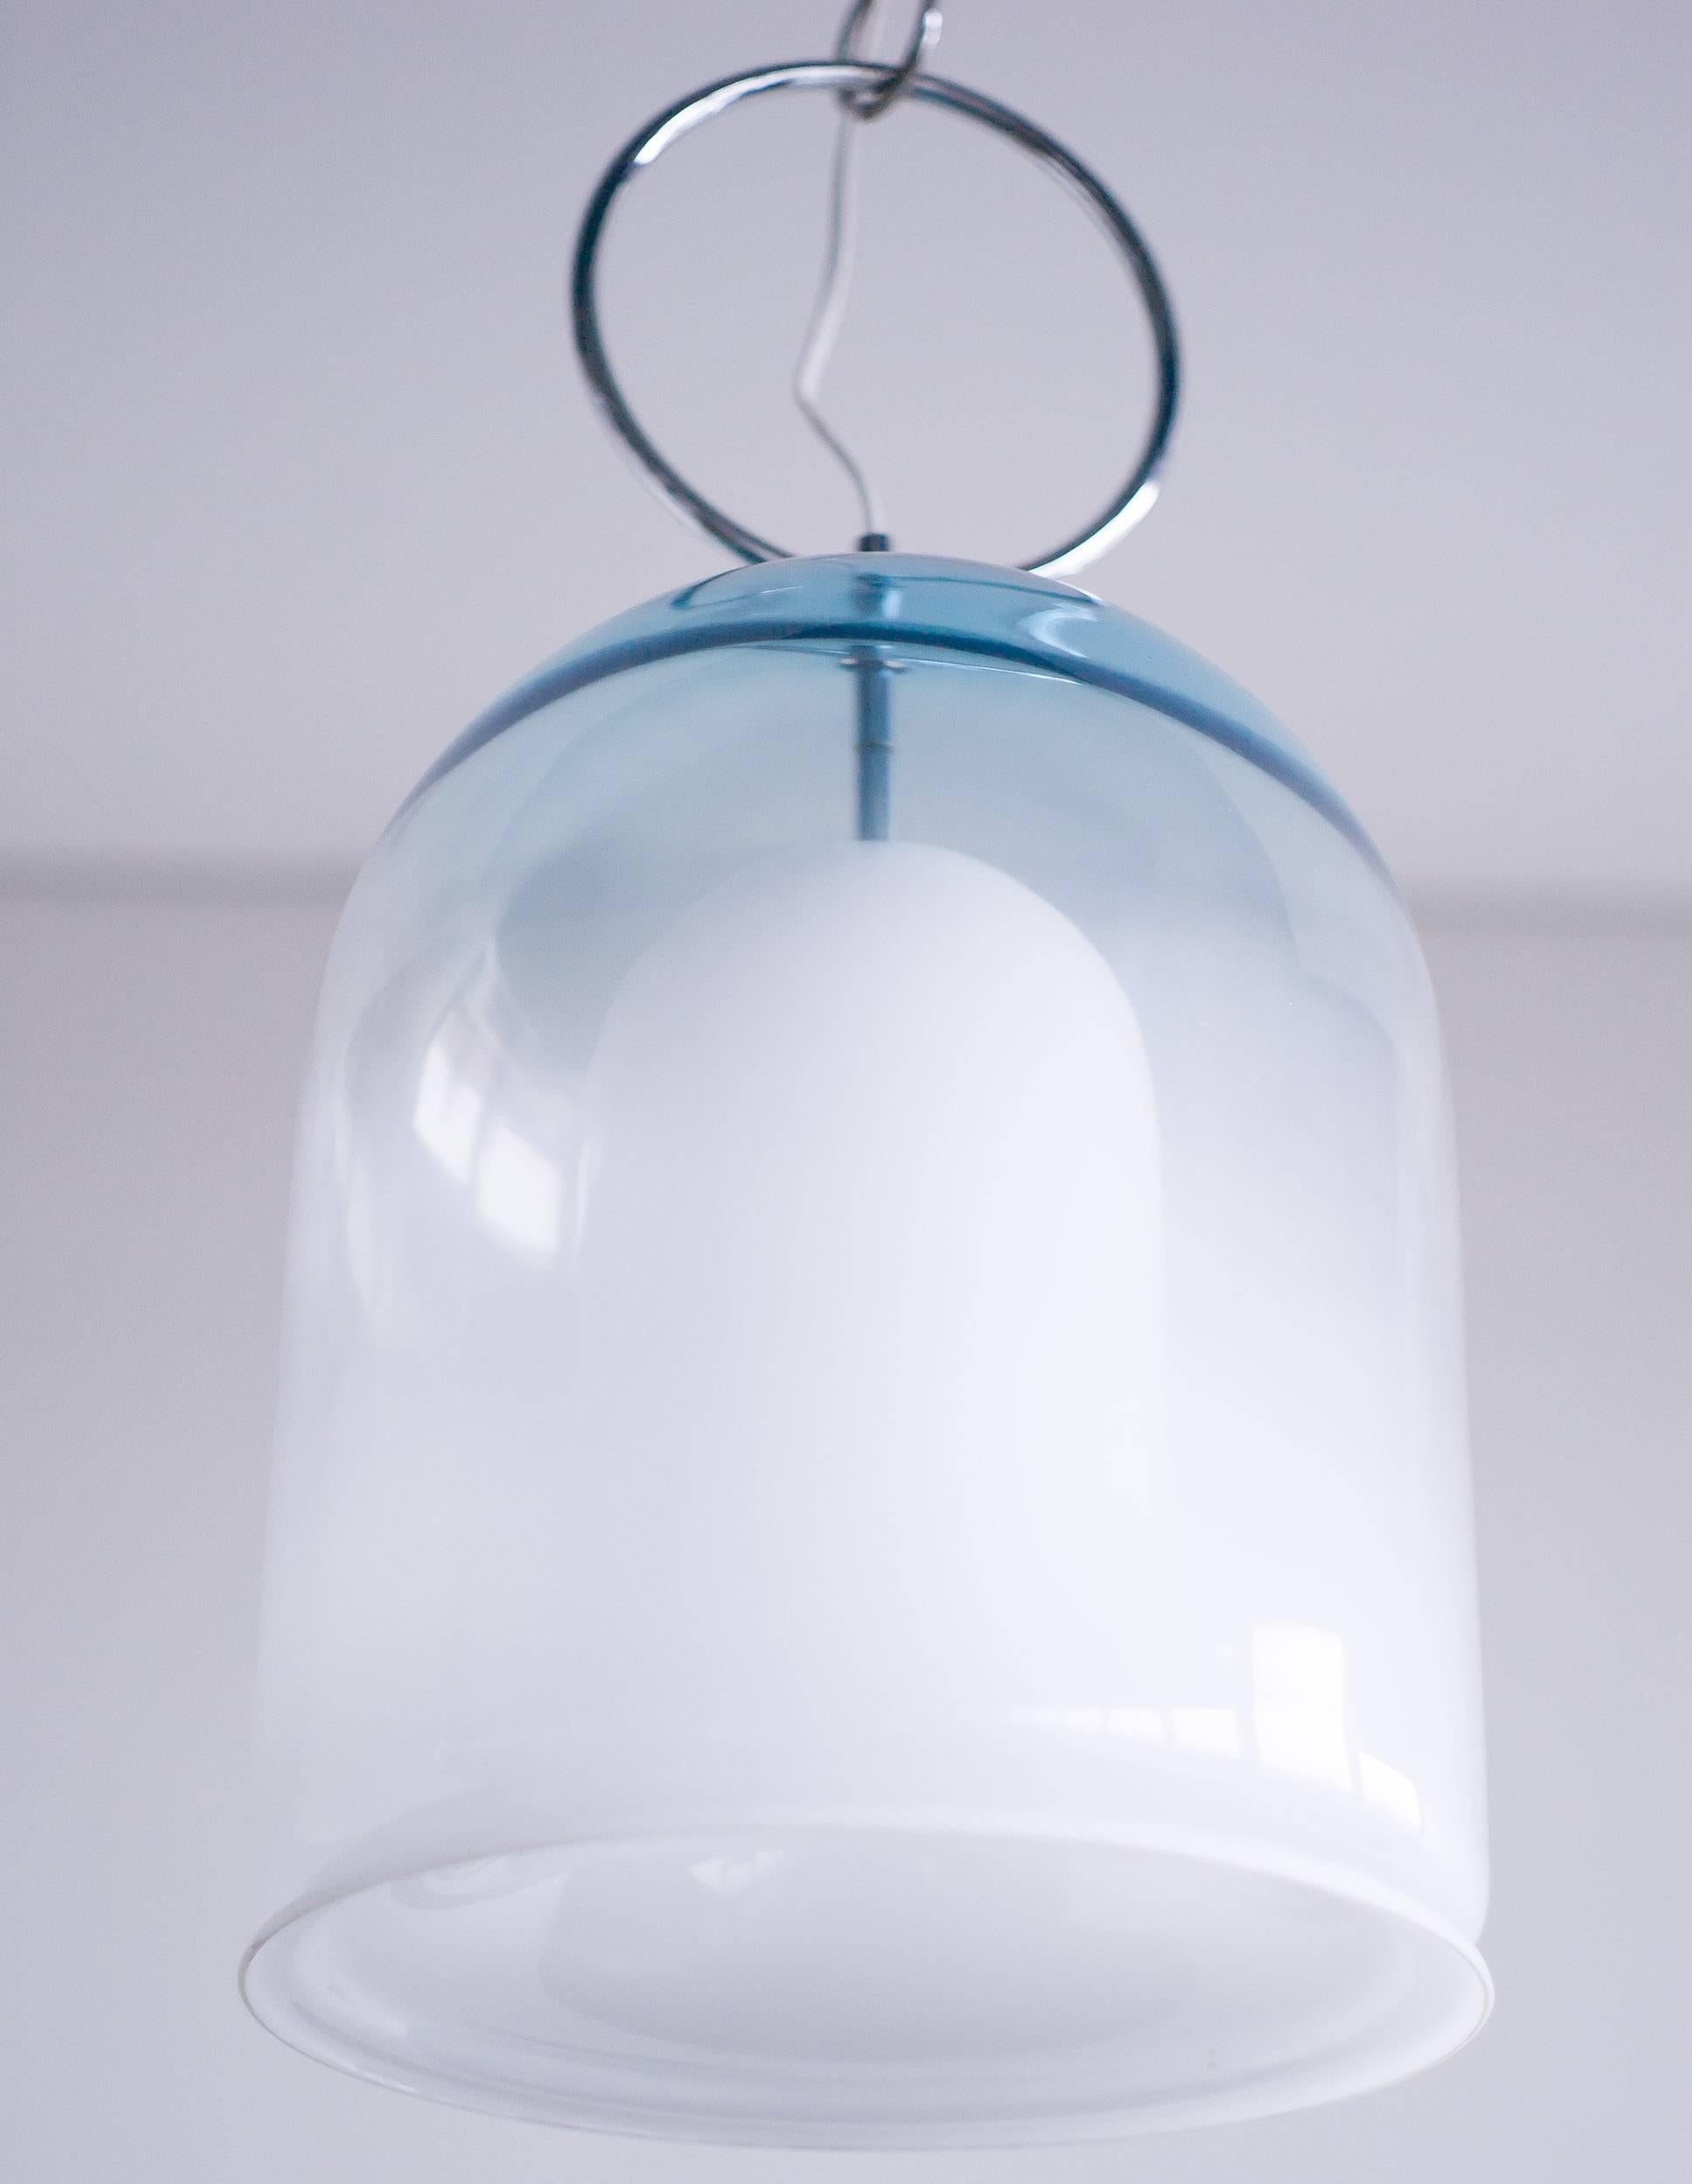 Glass pendant with chromed steel frame designed by Carlo Mason for Mazzega.
Good condition, some chips to the exterior glass top, not visible when in use.

Excellent fast and affordable worldwide shipping.